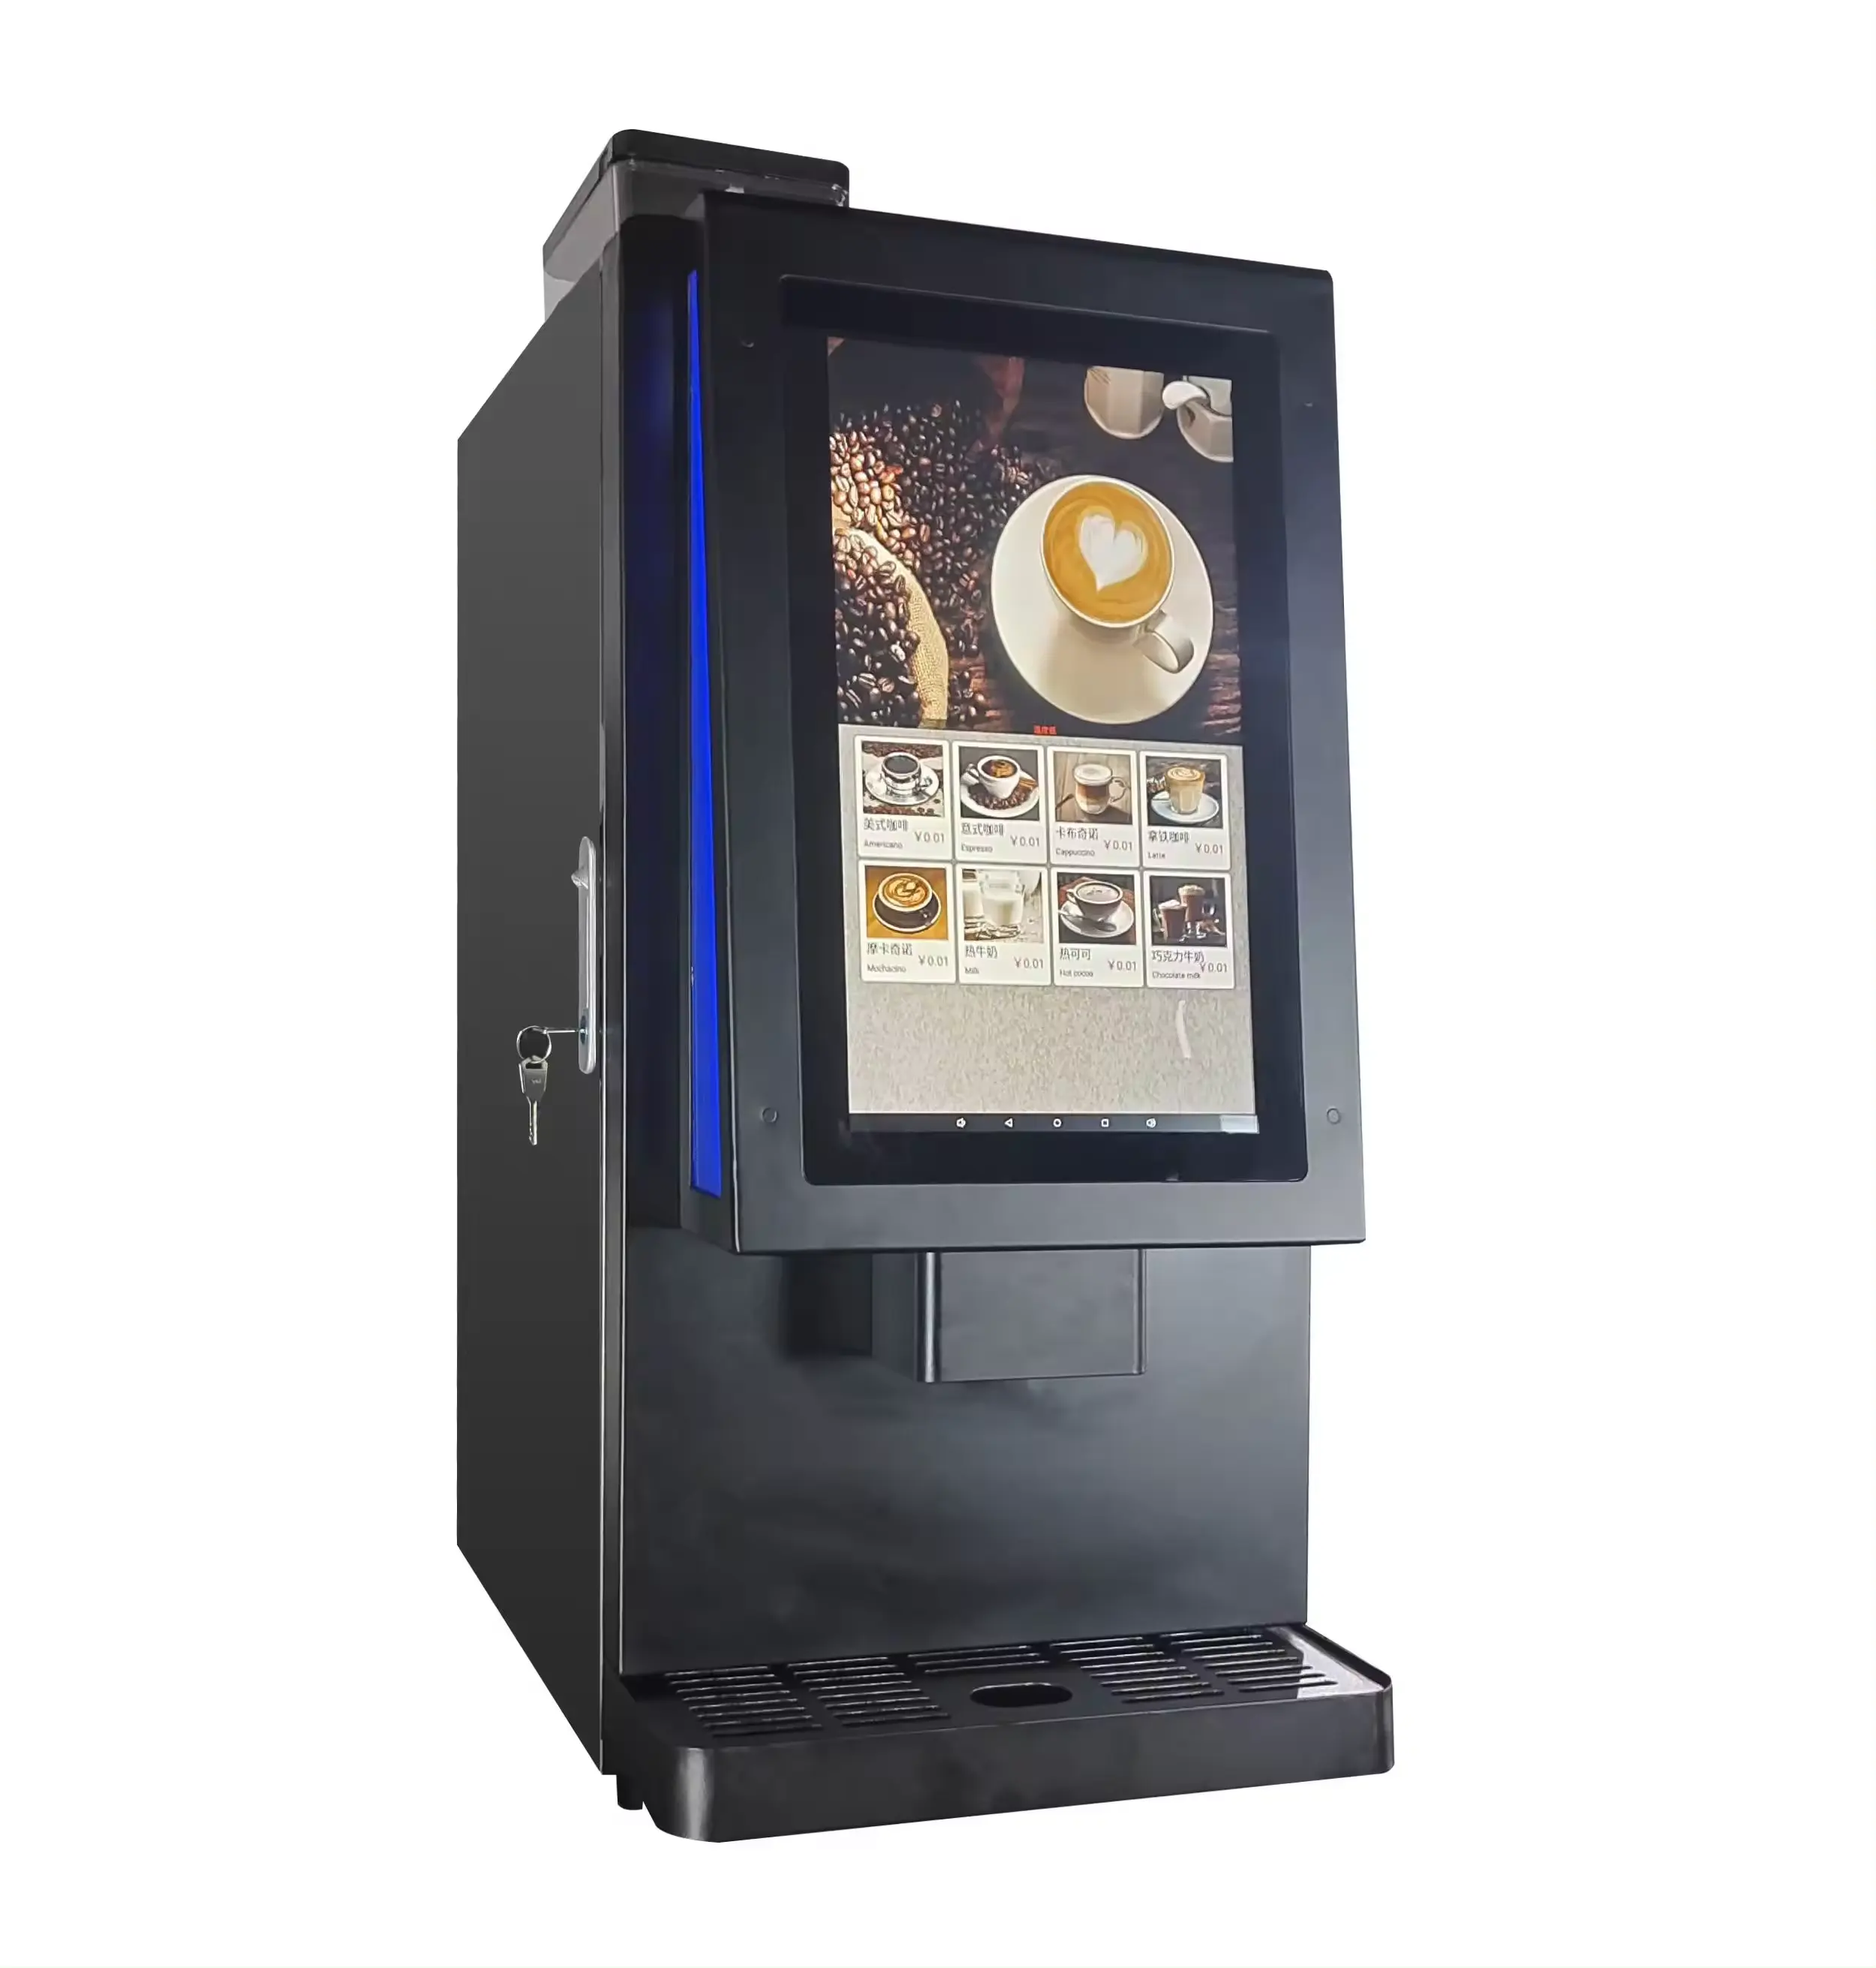 Multi Function Fully Automatic Bean Grinding Smart Intelligent Stainless Steel Cappuccino Latte Coffee Vending Machine